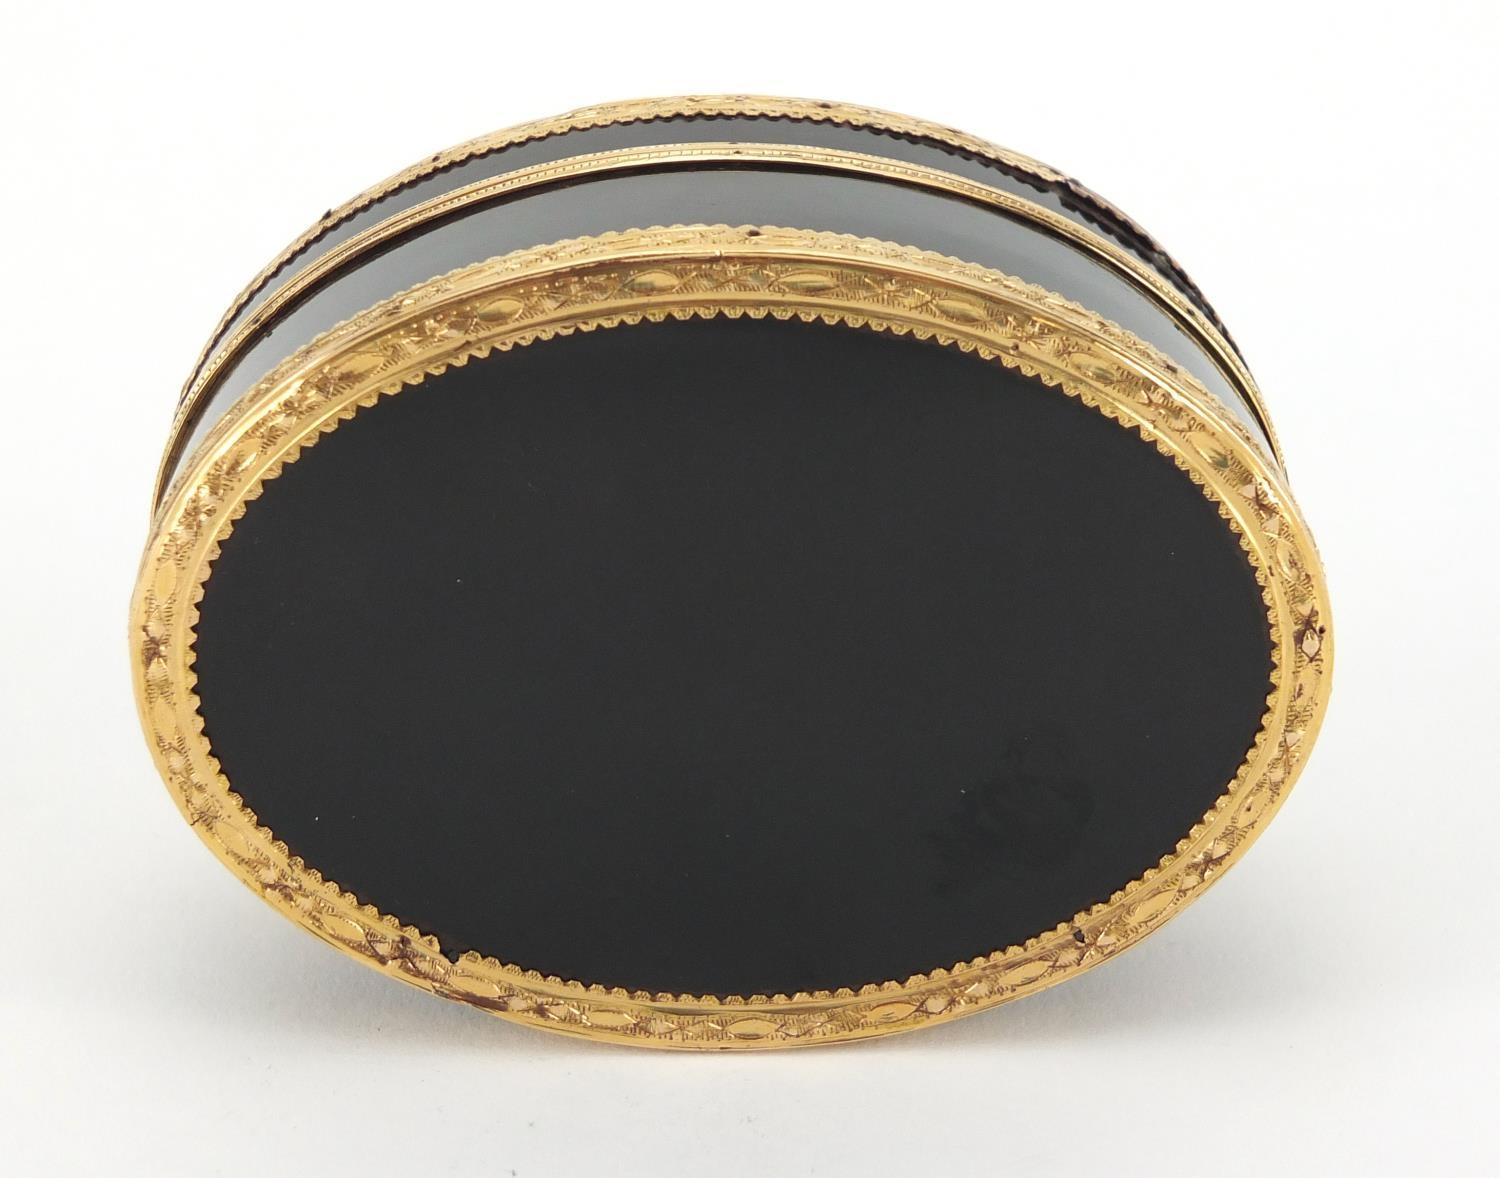 18th century French oval tortoiseshell snuff box with gold mounts, indistinct marks to the inside - Image 8 of 8